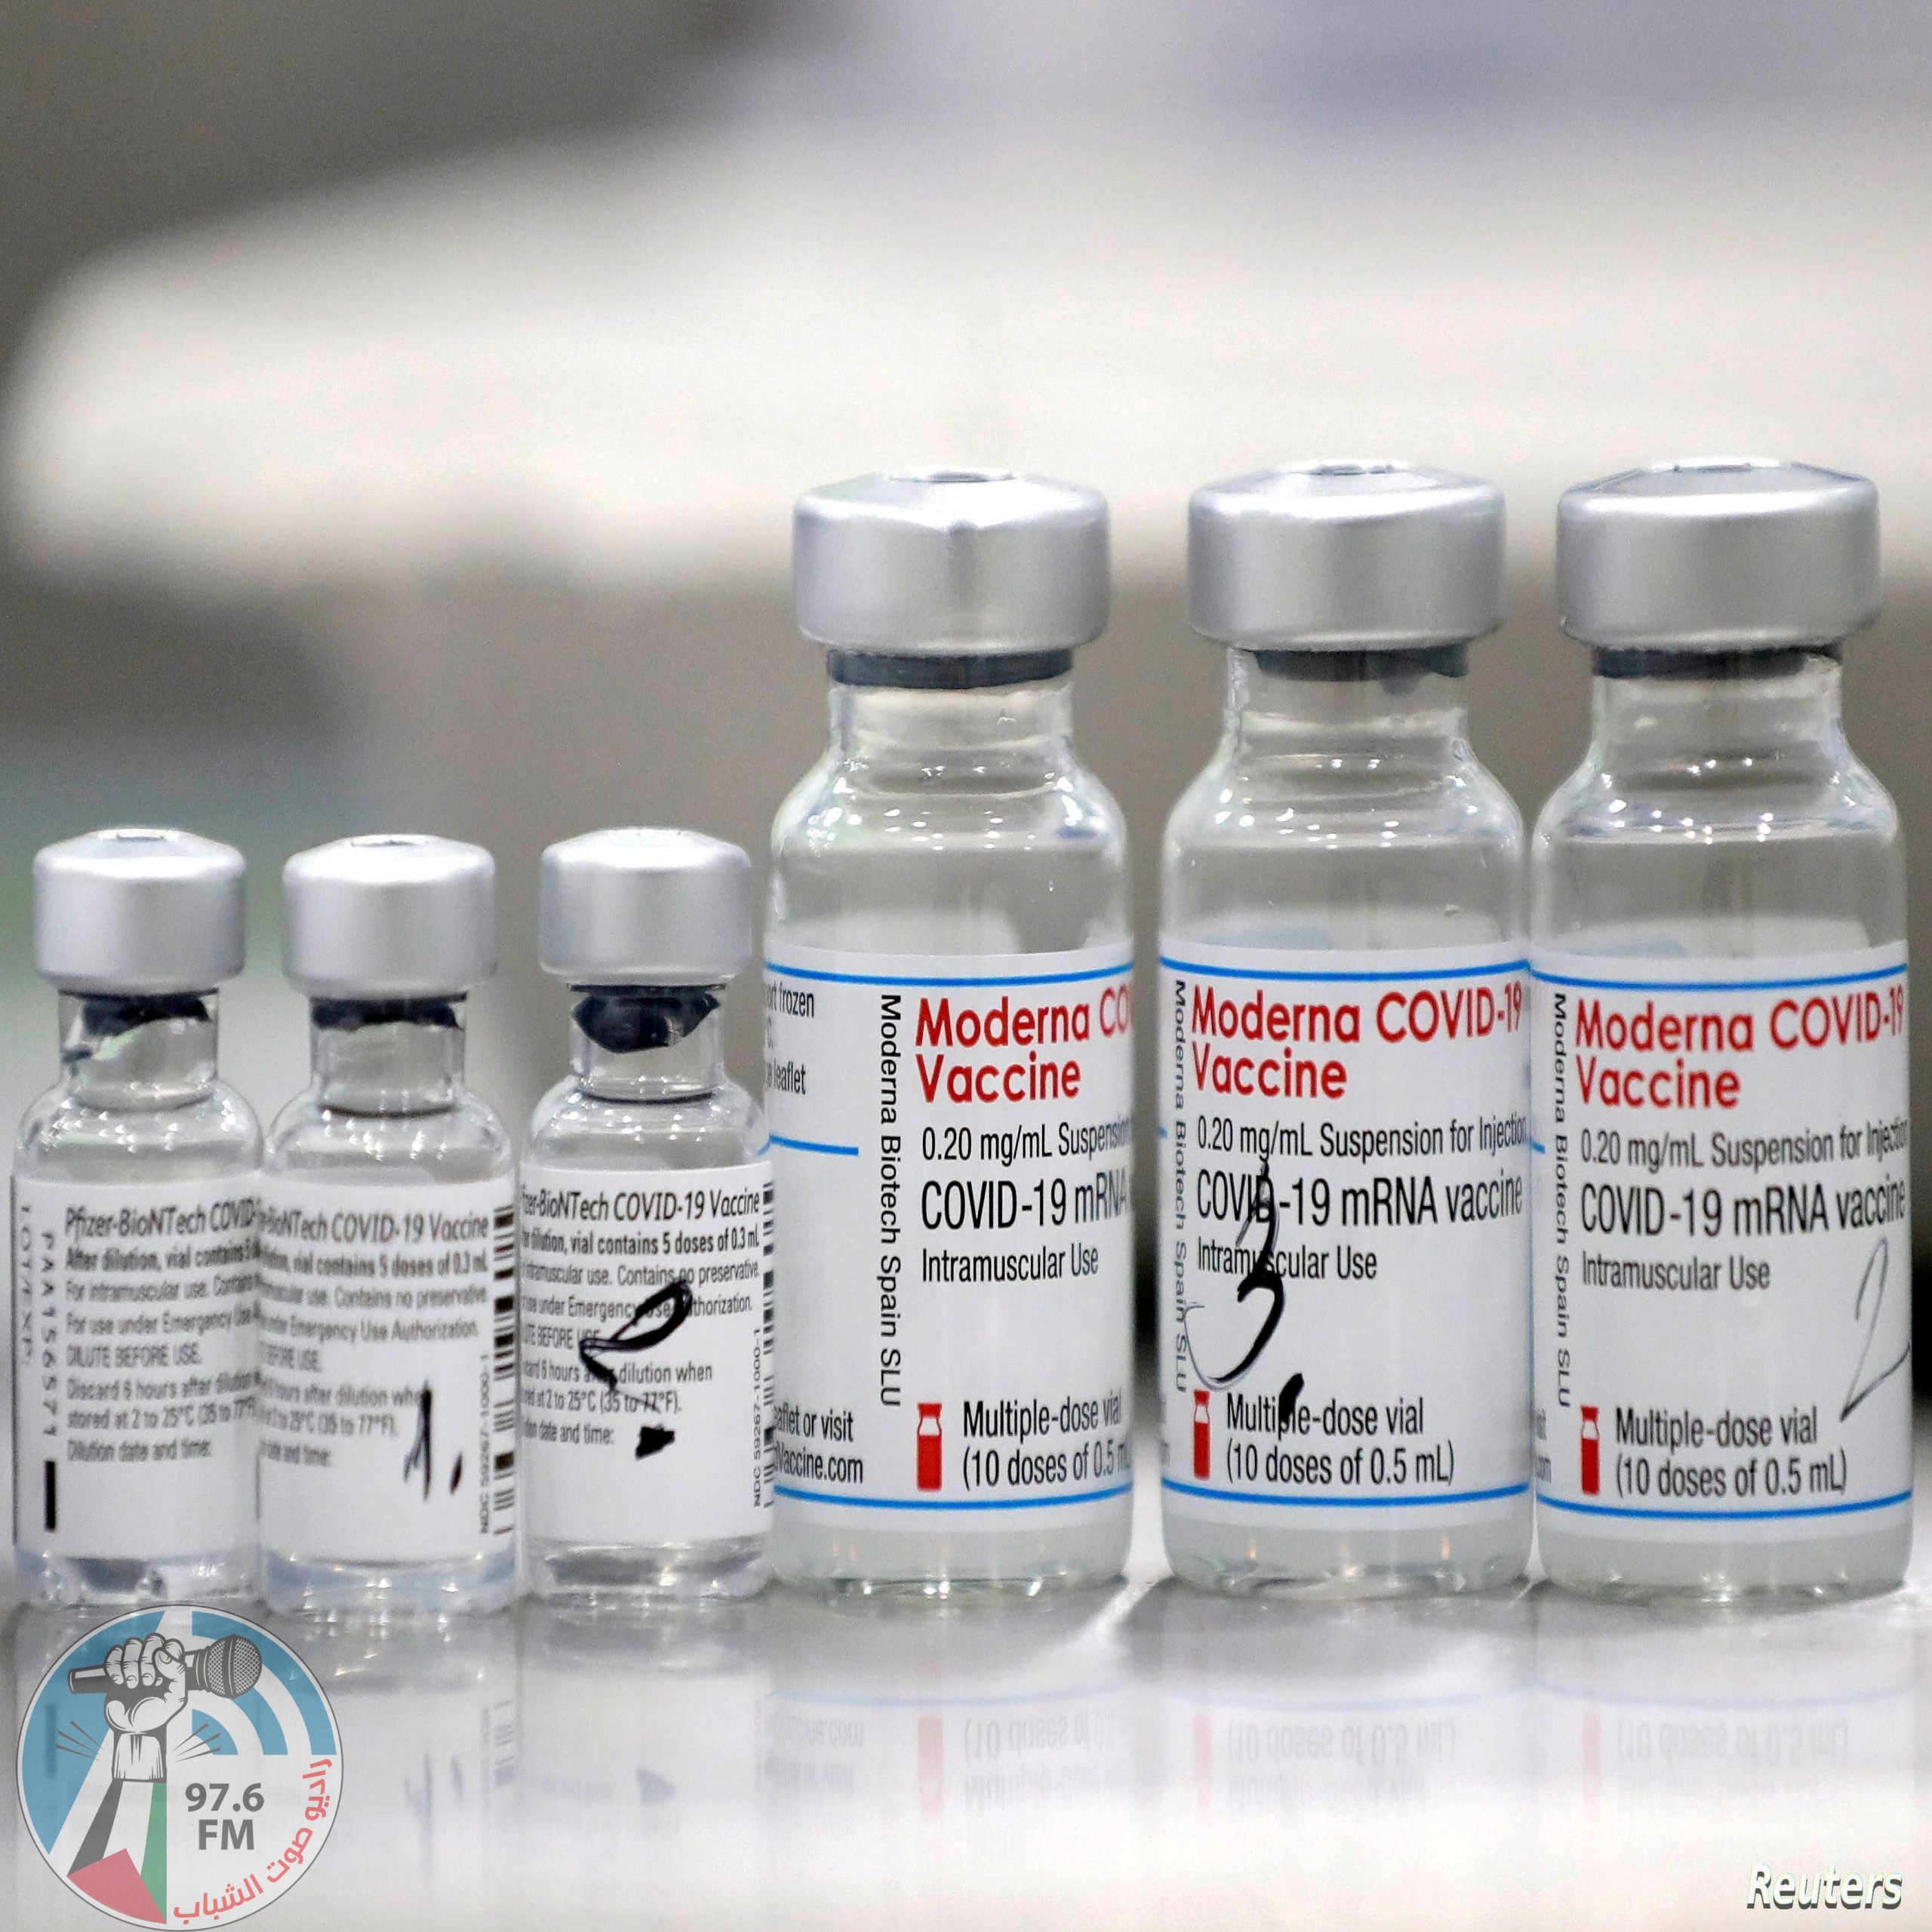 FILE PHOTO: Vials of coronavirus disease (COVID-19) vaccines of Pfizer-BioNTech and Moderna are seen in the town of Ricany near Prague, Czech Republic, February 25, 2021. REUTERS/David W Cerny/File Photo